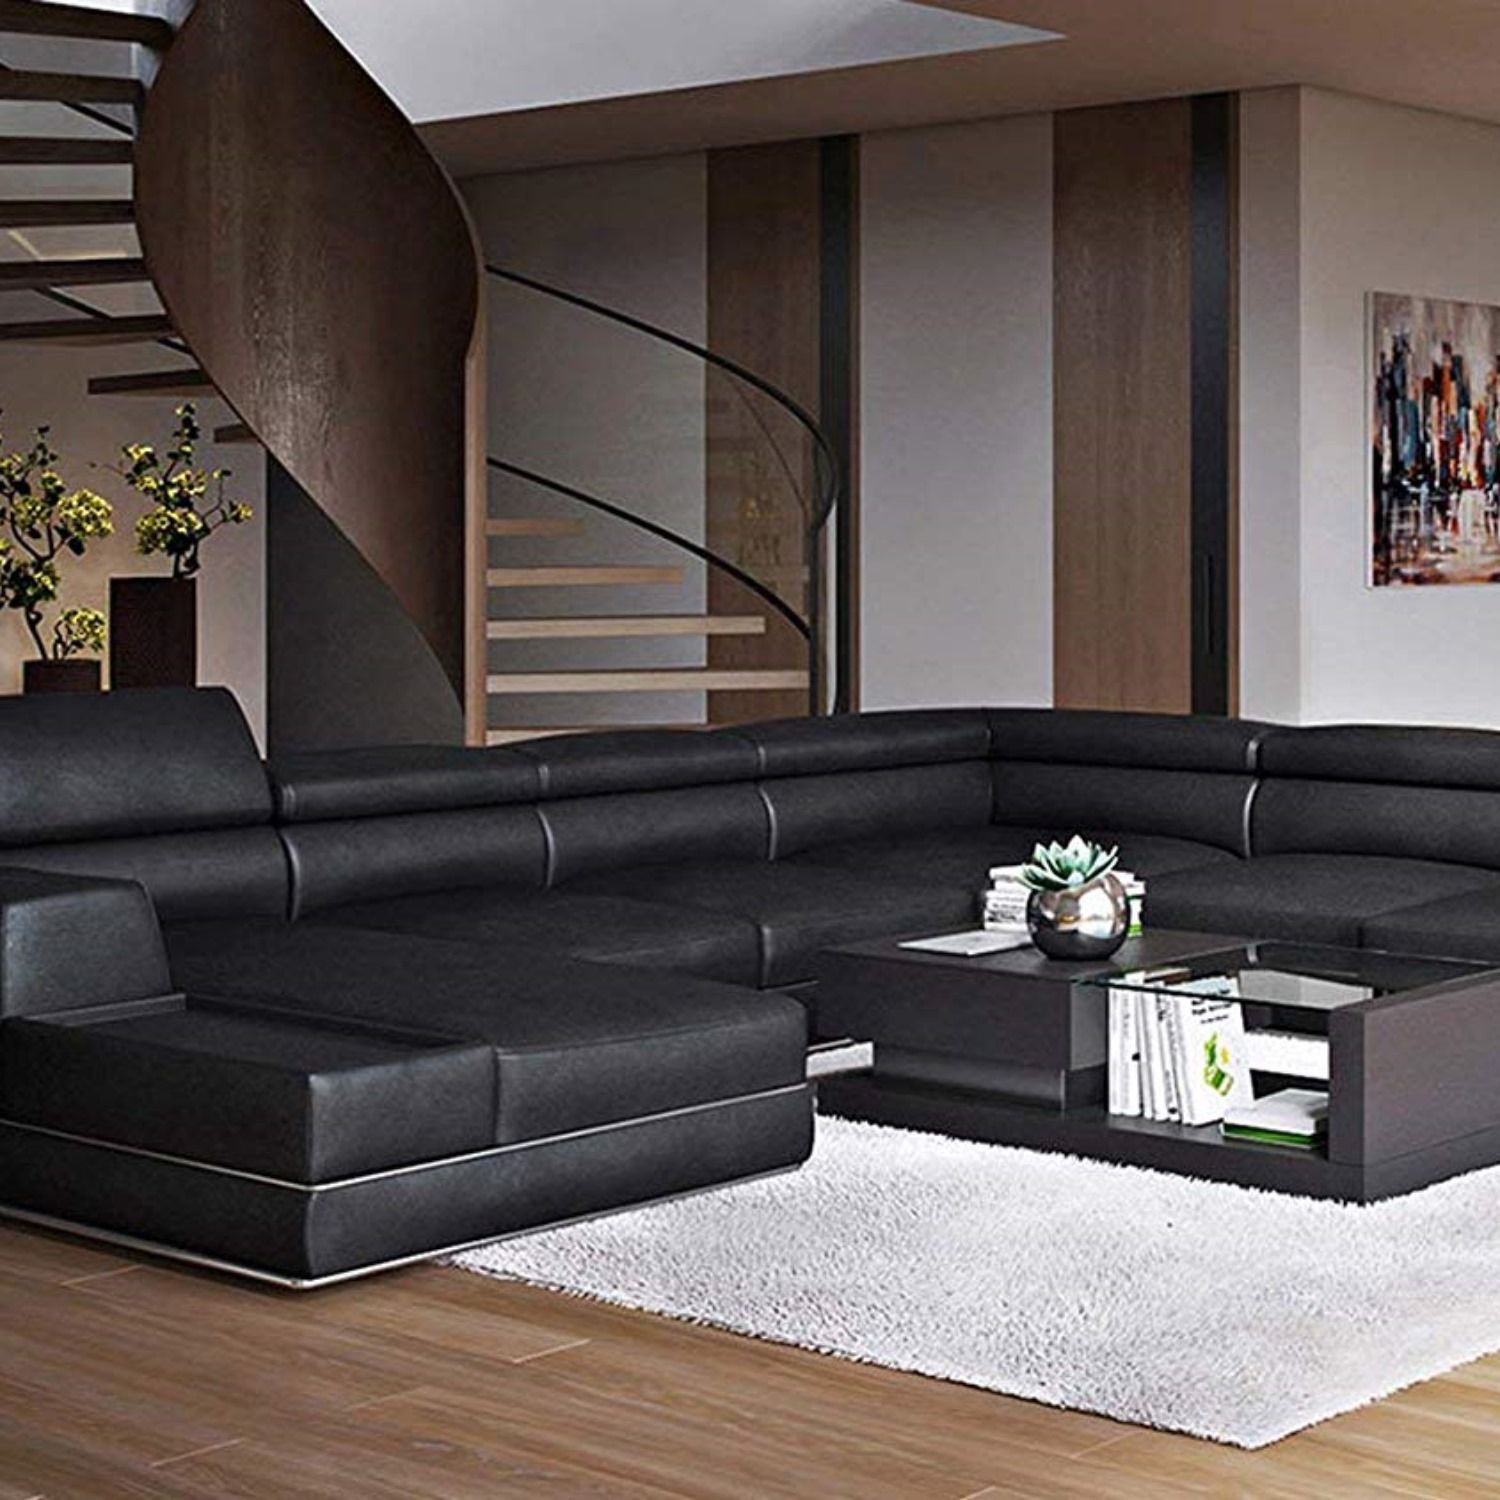 Modern Black Leather Sectional Sofa Living Room Couch Sleek Intended For Right Facing Black Sofas (Gallery 13 of 20)